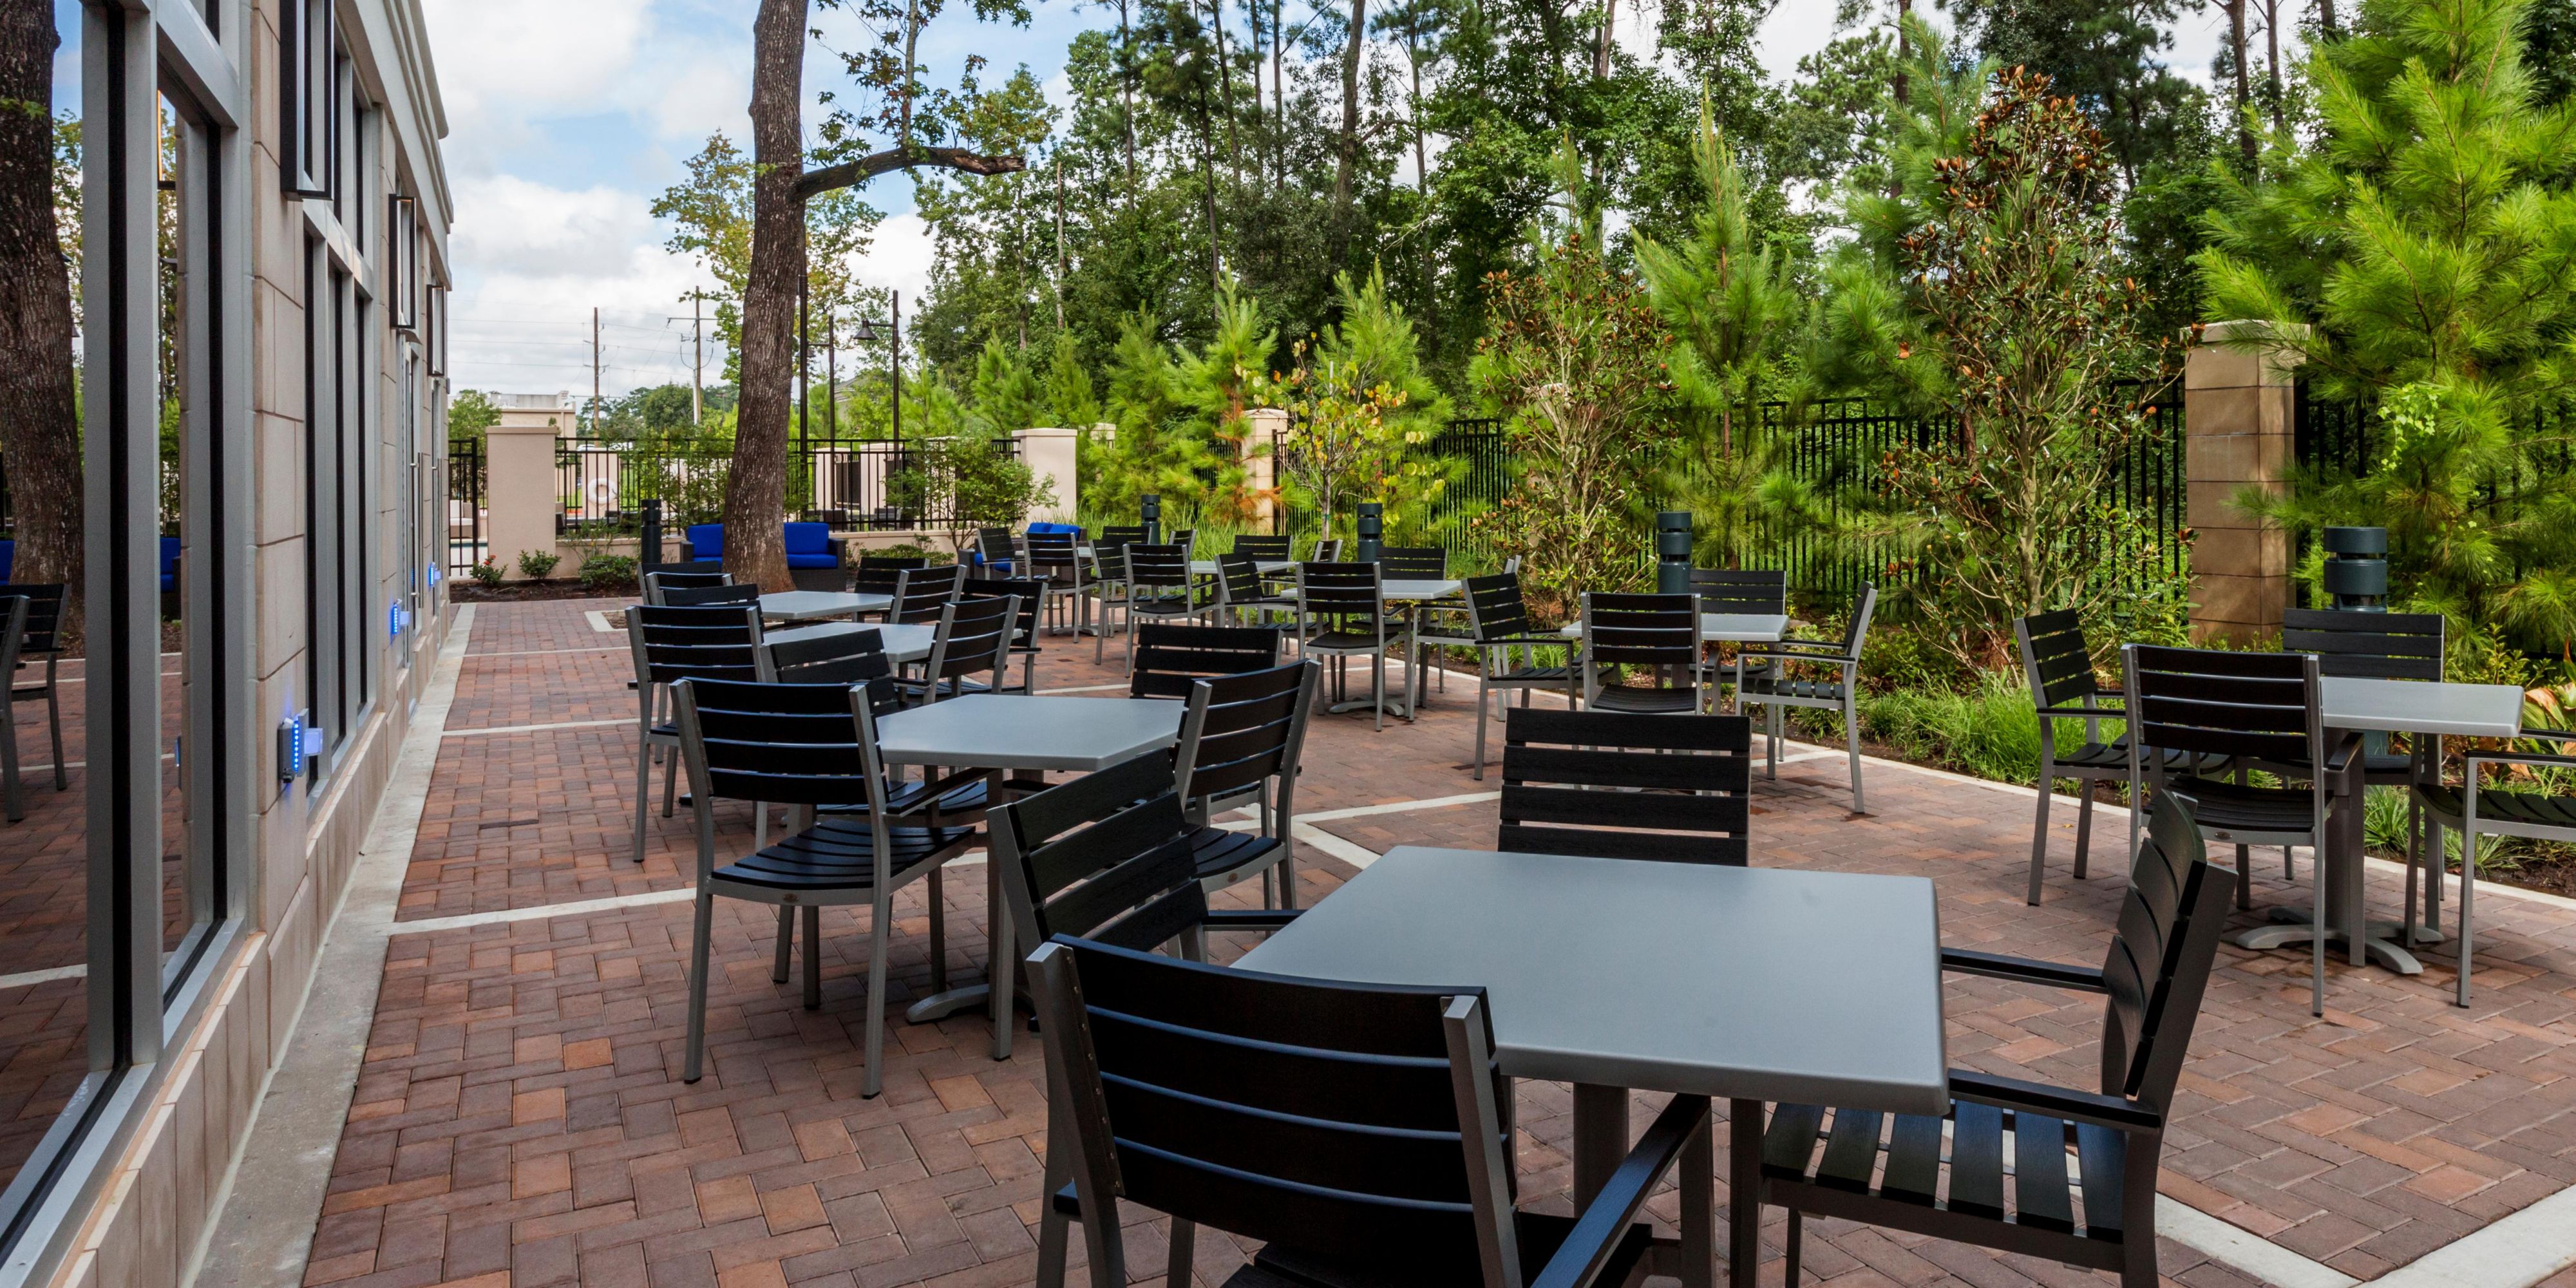 Feel the refreshing ambiance at our outdoor guest dining lounge.